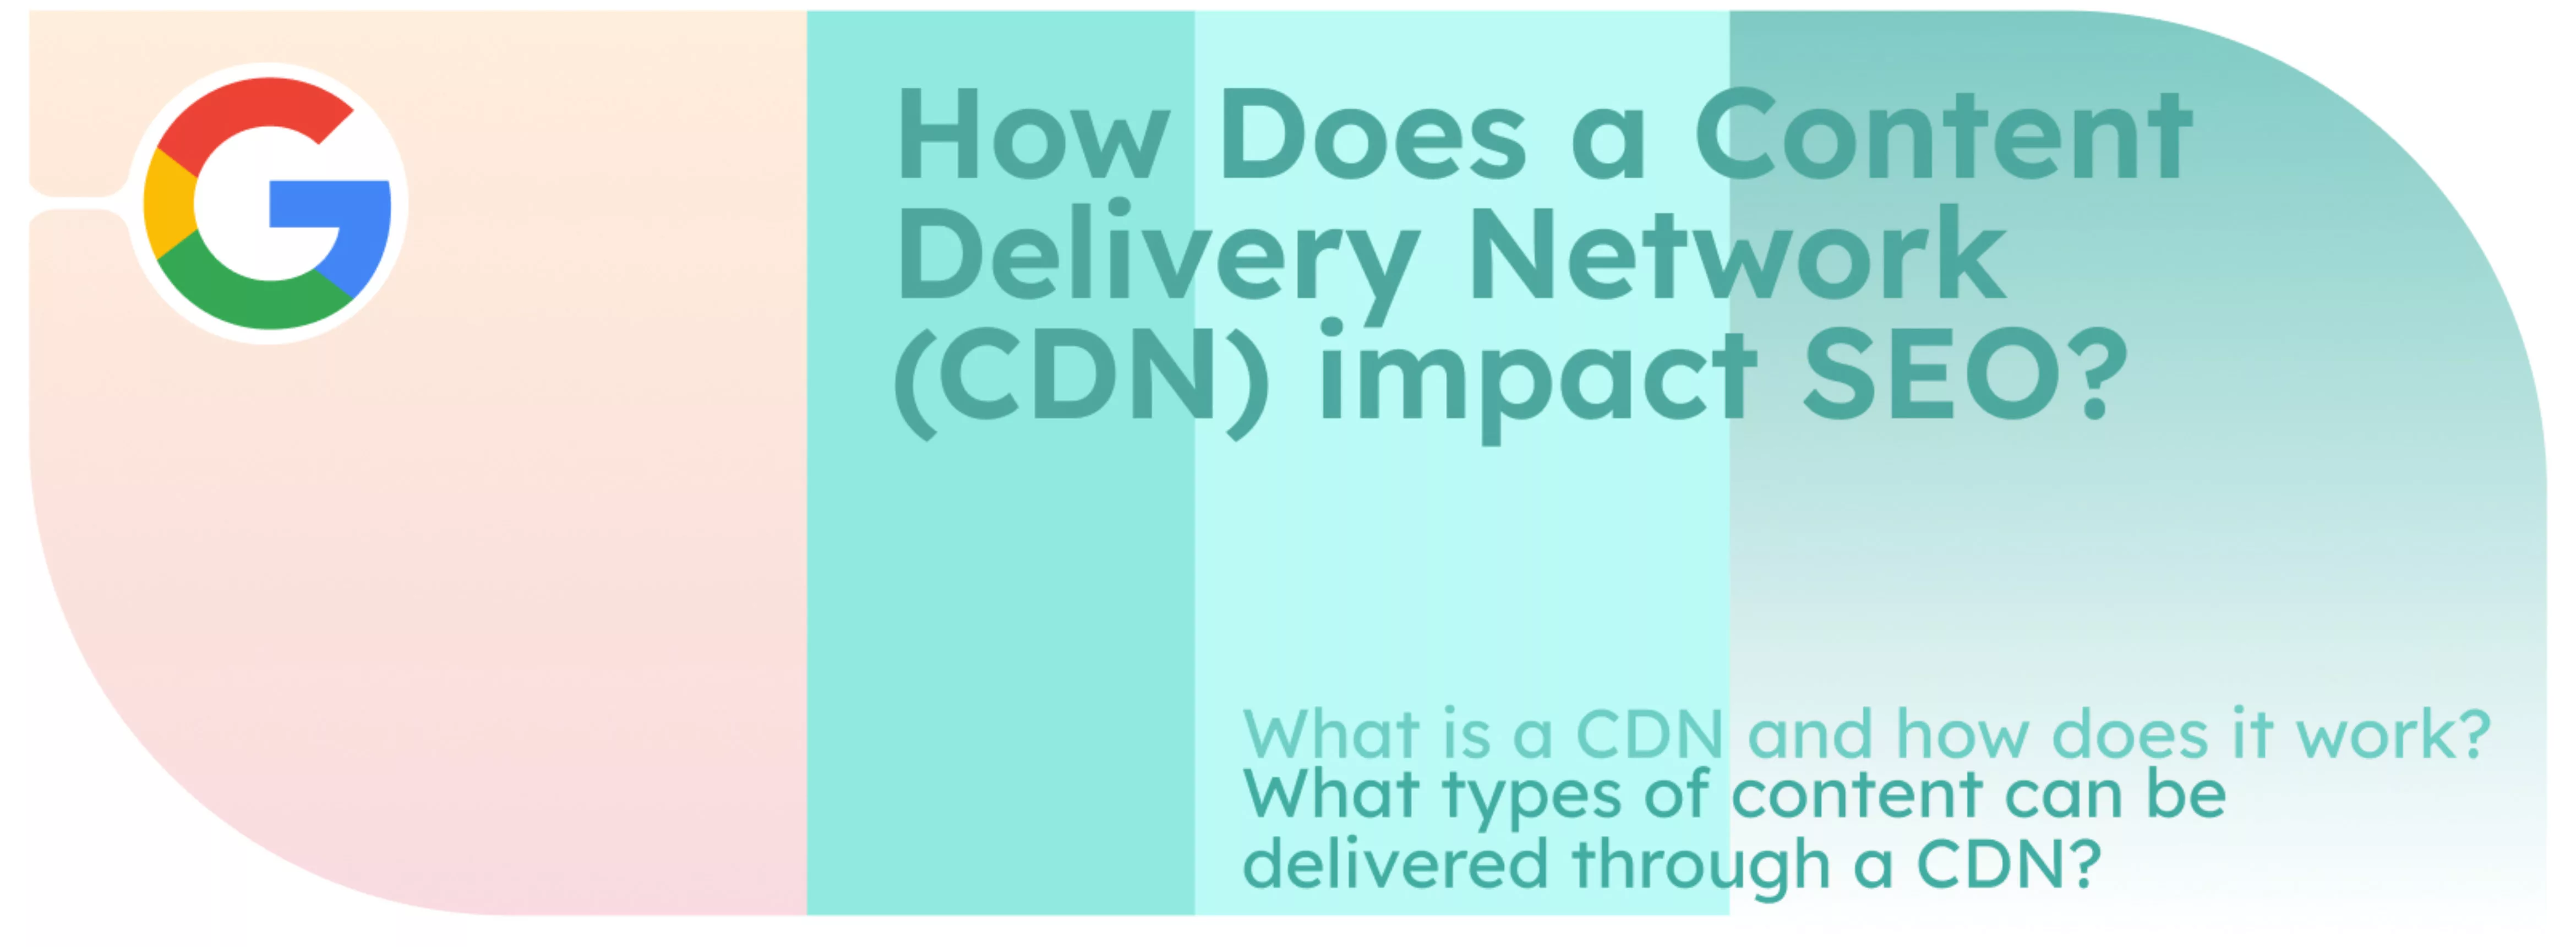 How Does a Content Delivery Network (CDN) impact SEO?